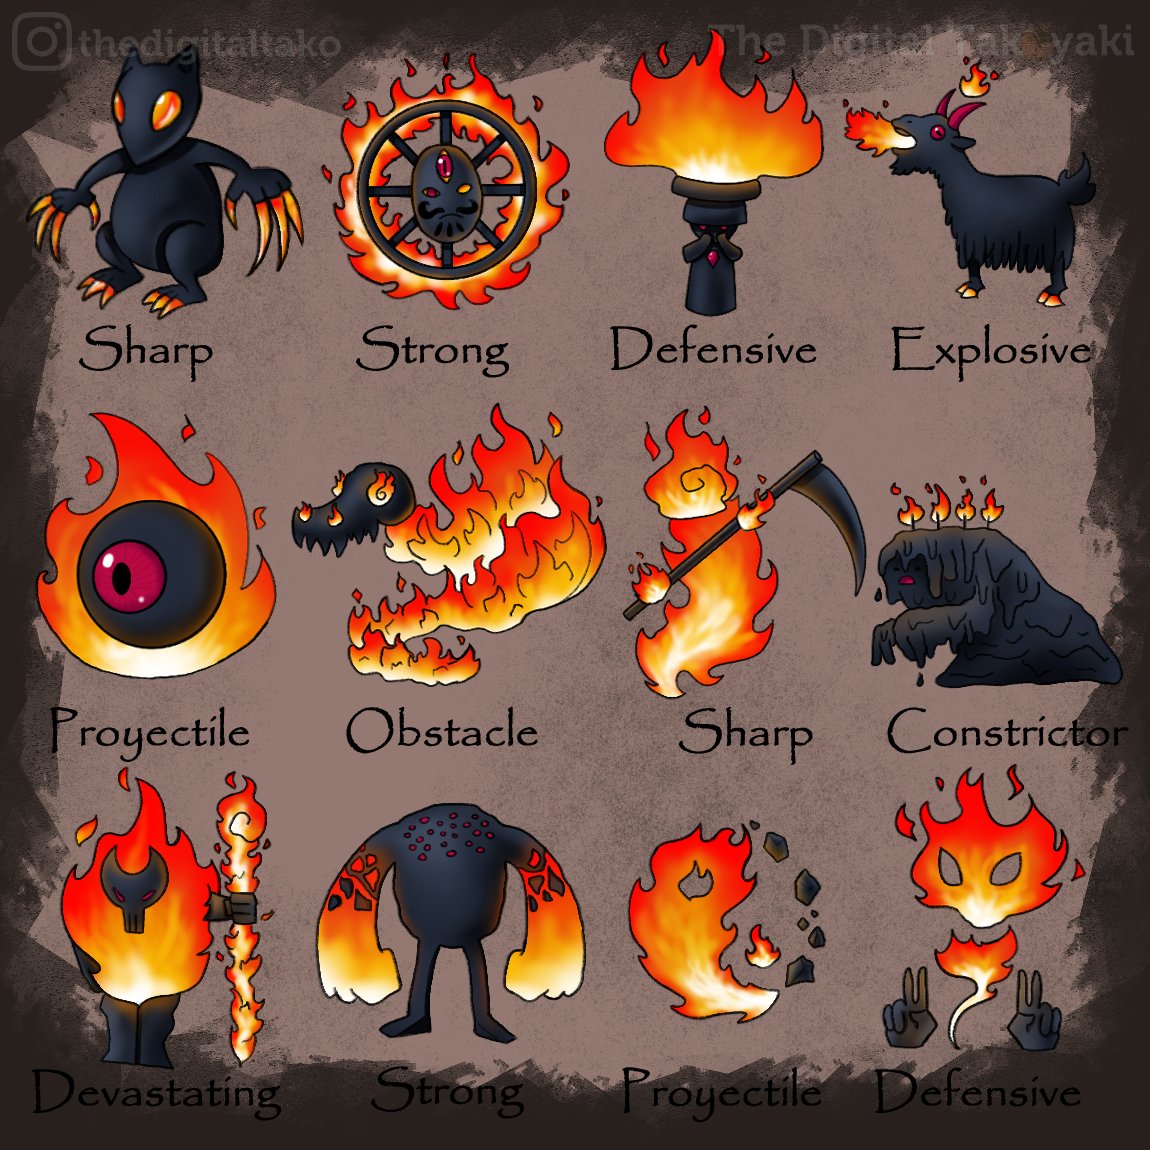 A few #fire #elementals I did for the channeler to summon in my last #role campaign!
(Btw, 'strong', 'sharp', etc are tags with the elemental core ability!)
#illustrations #digitalart #artedigital #イラスト #アート #dnd #dndart #fantasy #roleplay #dungeonworld #charcoal #elements